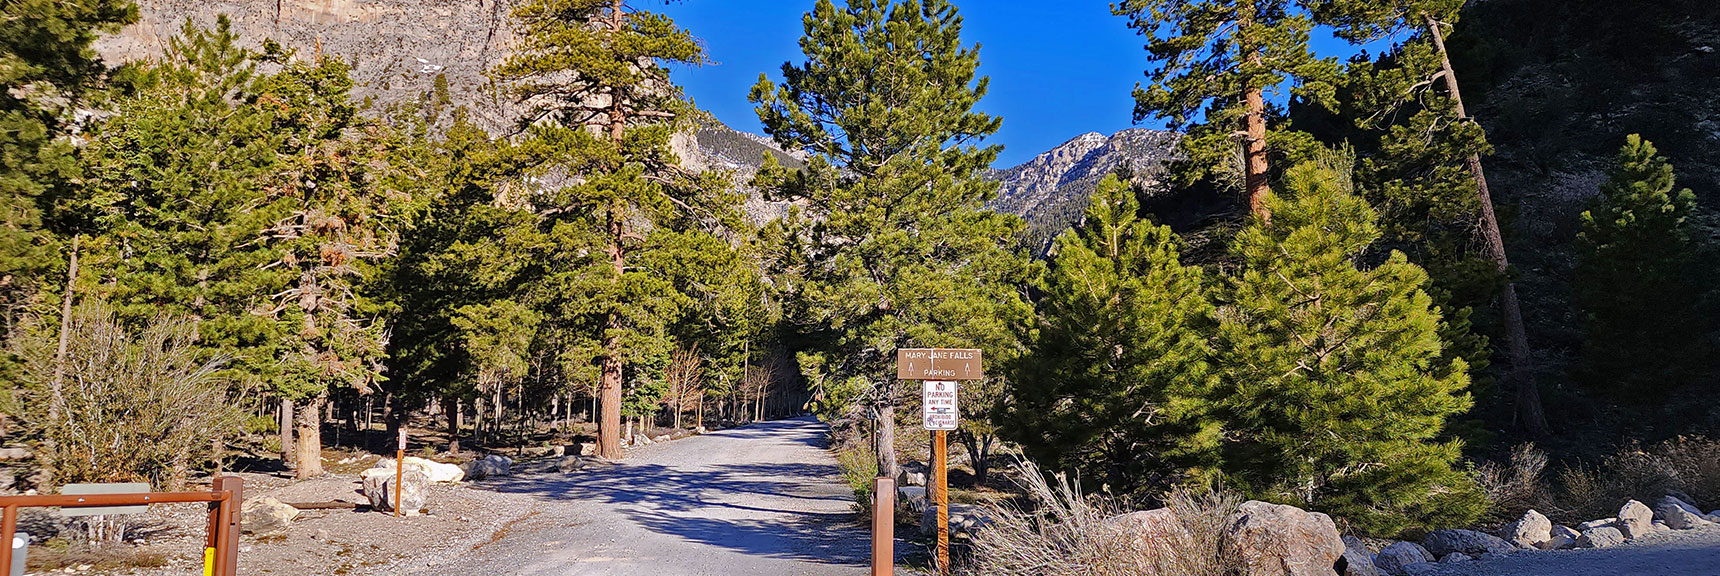 1000ft Unpaved Road from Trail Canyon Trailhead to Mary Jane Falls Trailhead | Mary Jane Falls | Mt. Charleston Wilderness | Spring Mountains, Nevada